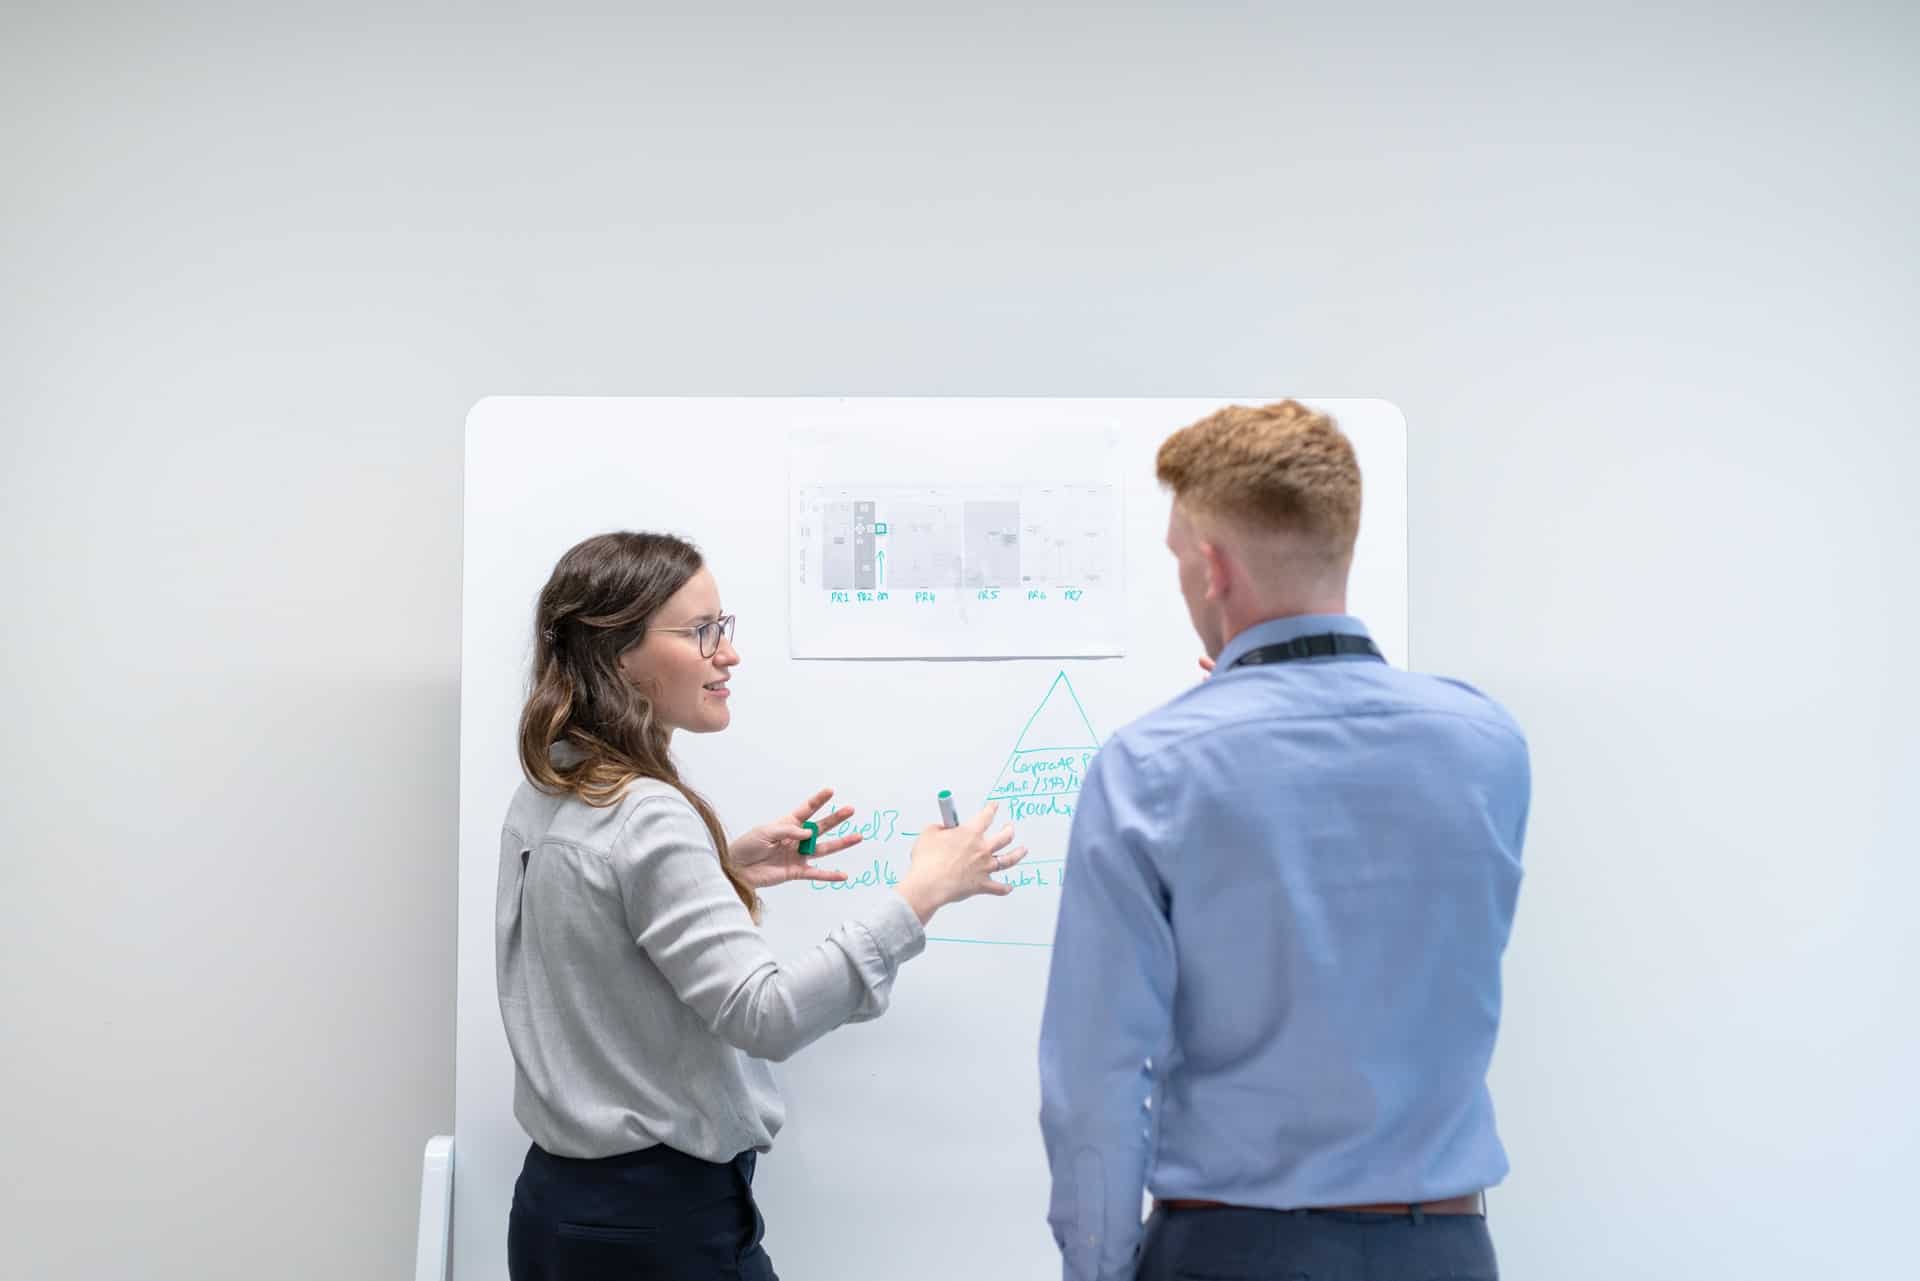 Man and woman in front of whiteboard